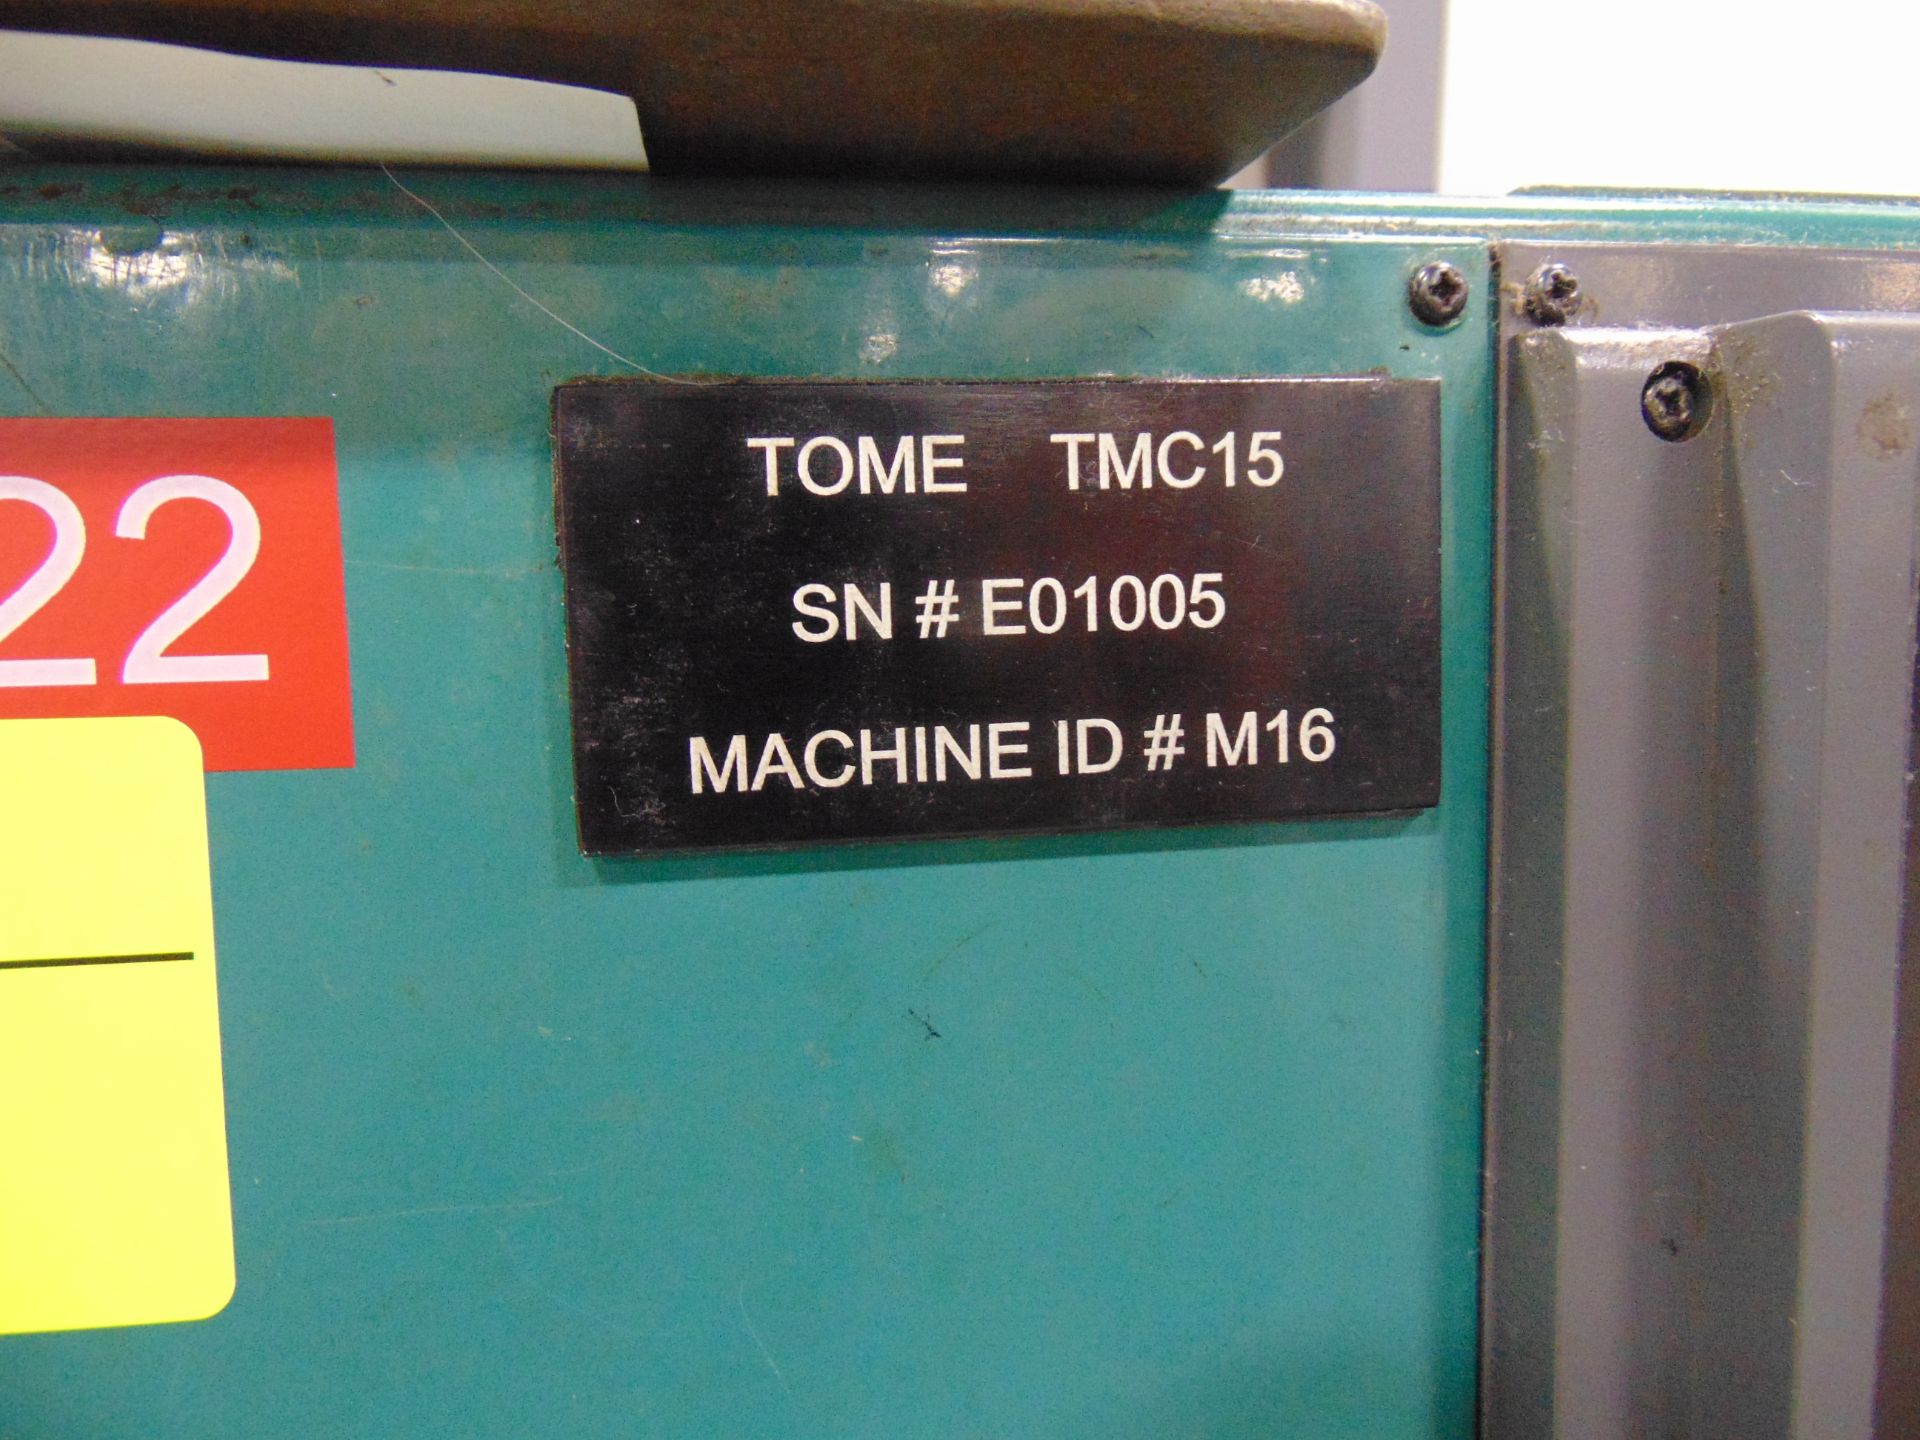 NAKAMURA TOME 2-AXIS CNC LATHE - Image 10 of 10